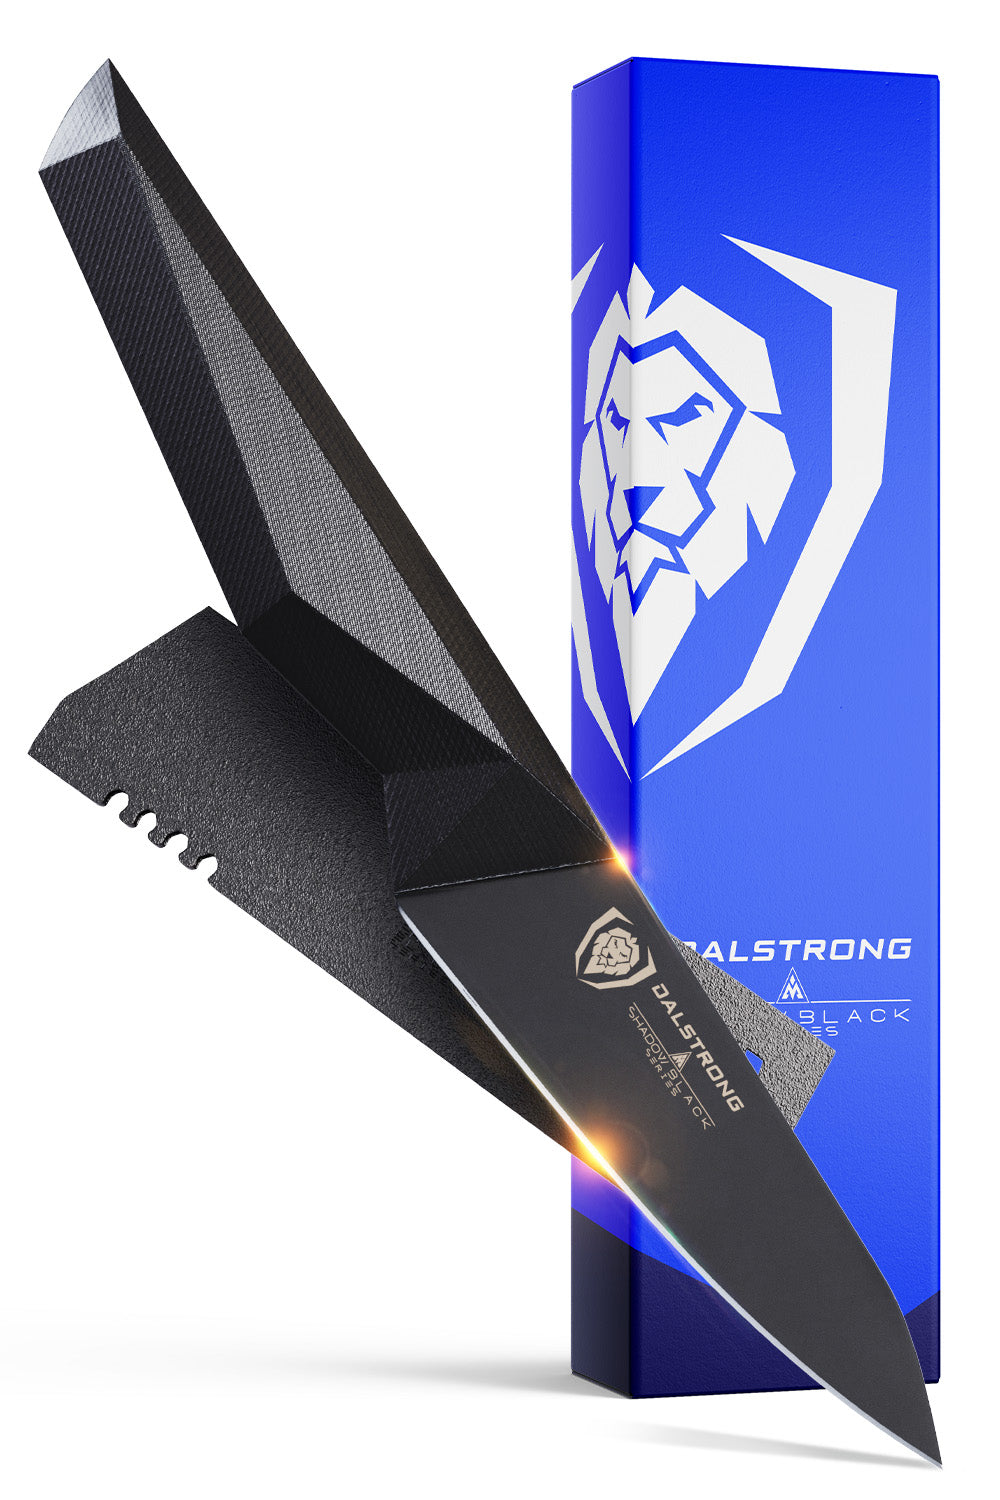 Paring Knife 3.75" | Shadow Black Series | NSF Certified | Dalstrong ©